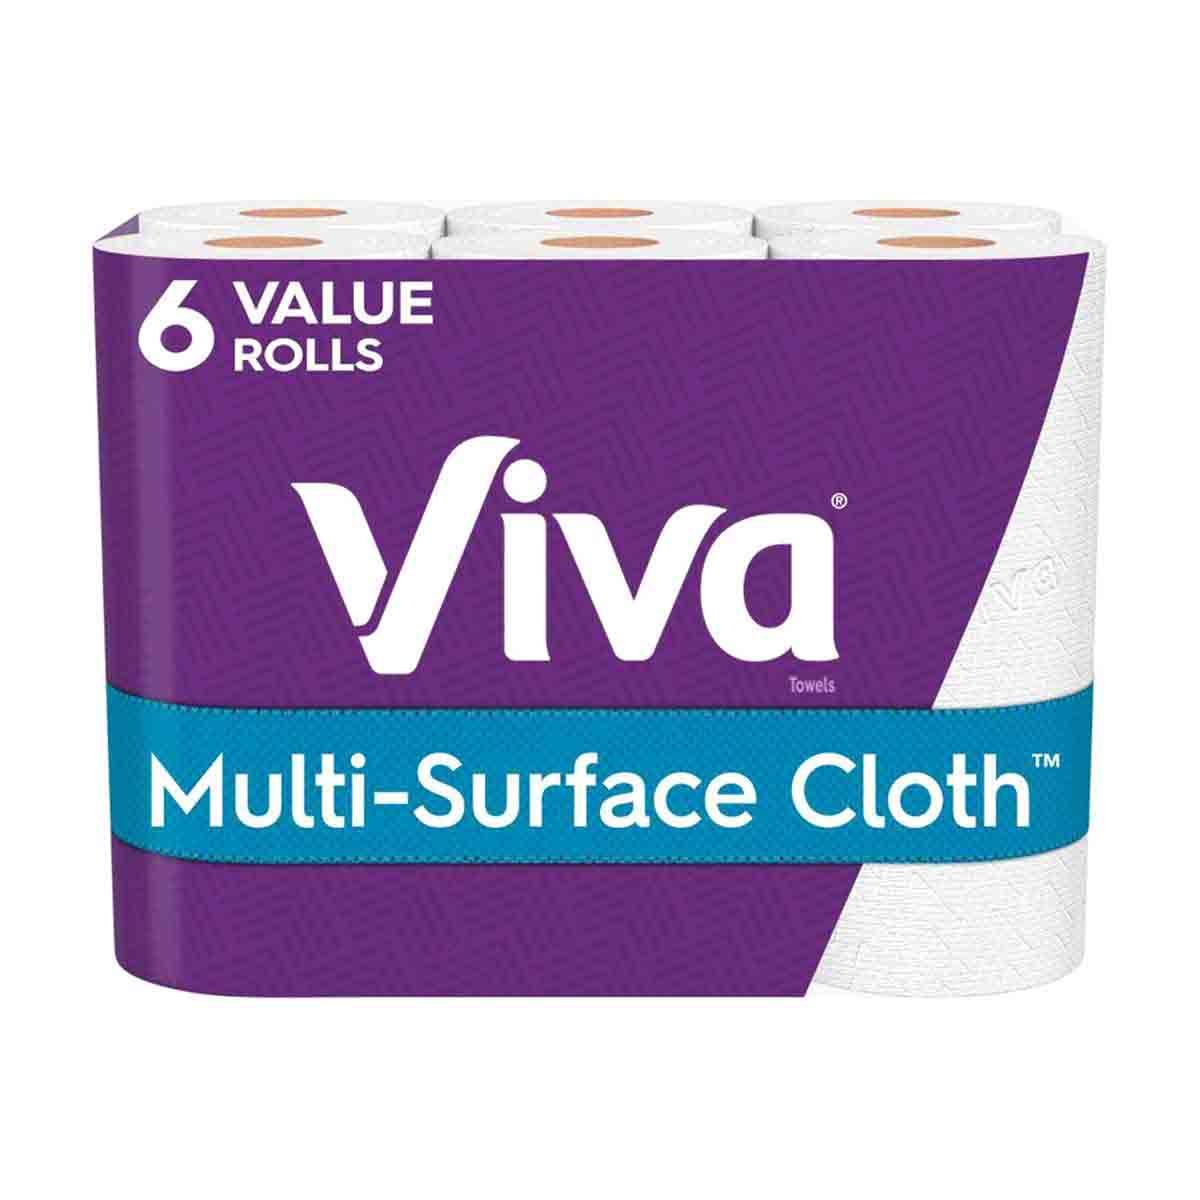 Viva Multi-Surface Cloth Paper Towels, Choose-A-Sheet - 6 Value Rolls (58 Sheets Per Roll) on Sale At Dollar General